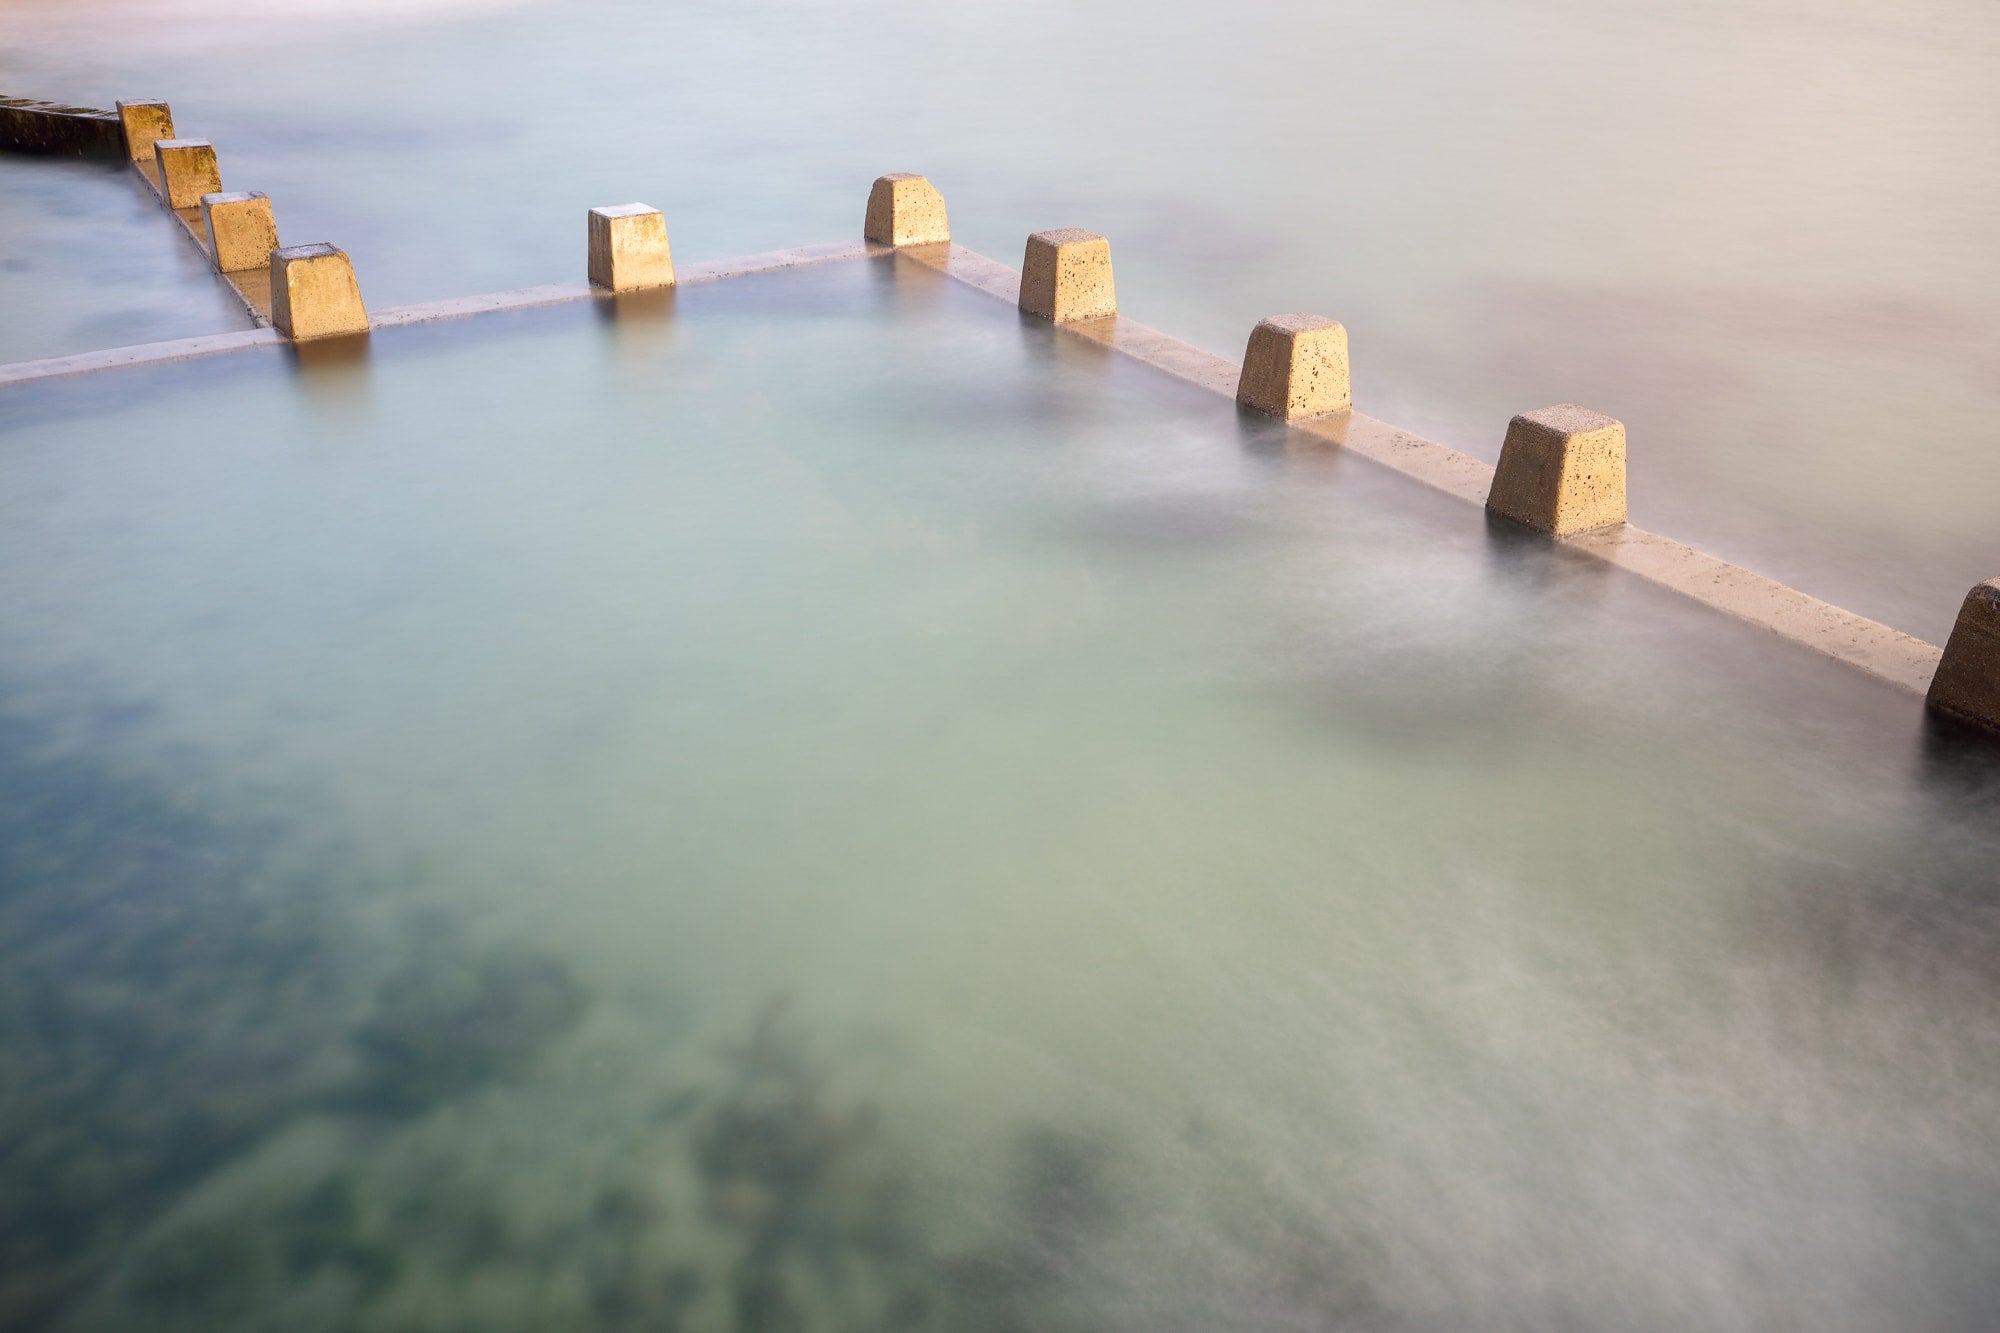 Long exposure photo of smooth, milky waters flowing around square concrete blocks in the ocean pool at Coogee Beach, Sydney, with subtle underwater details visible.